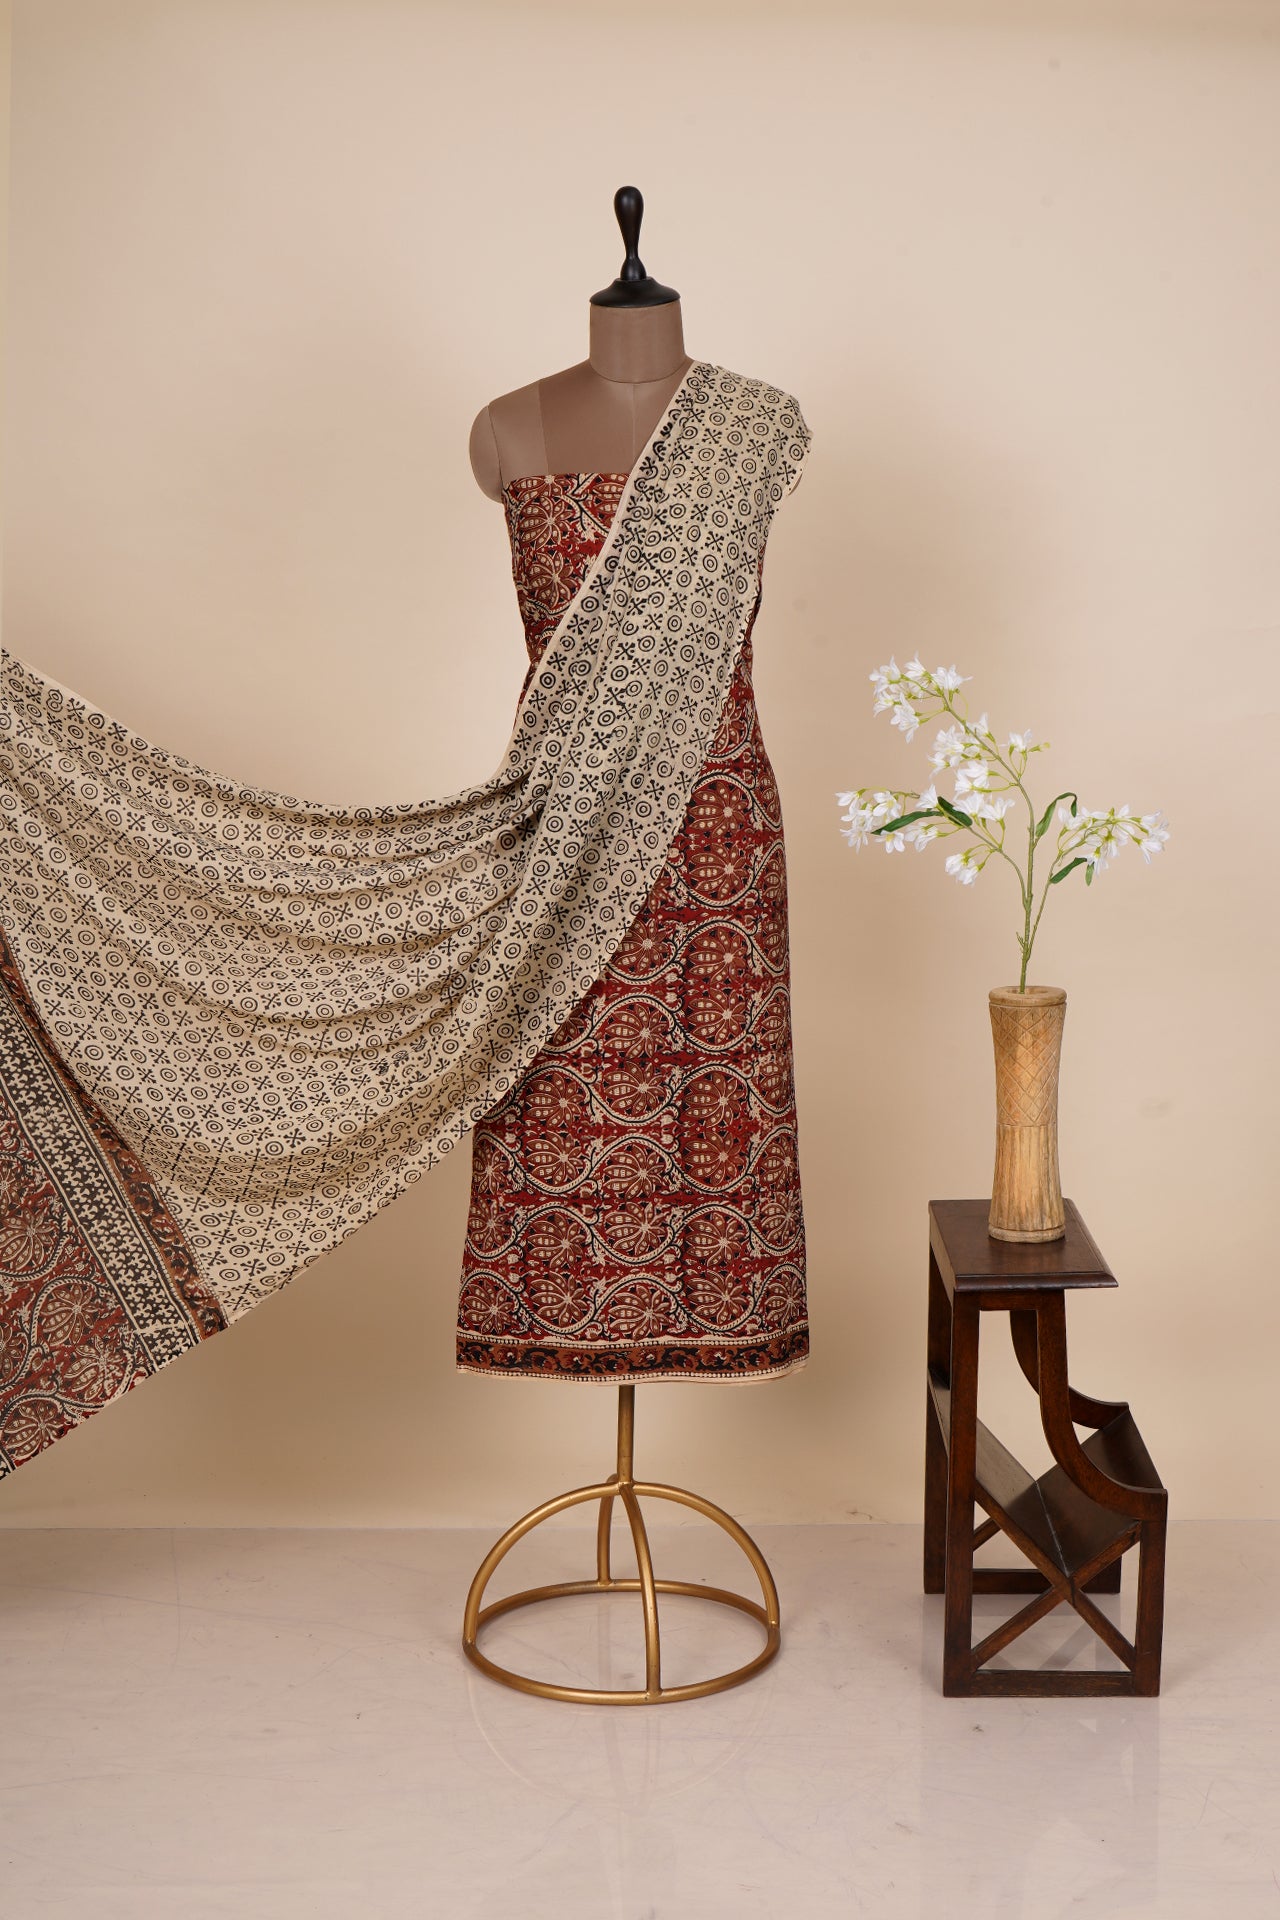 Maroon-Beige Color Handcrafted Block Printed Cotton Suit Sets